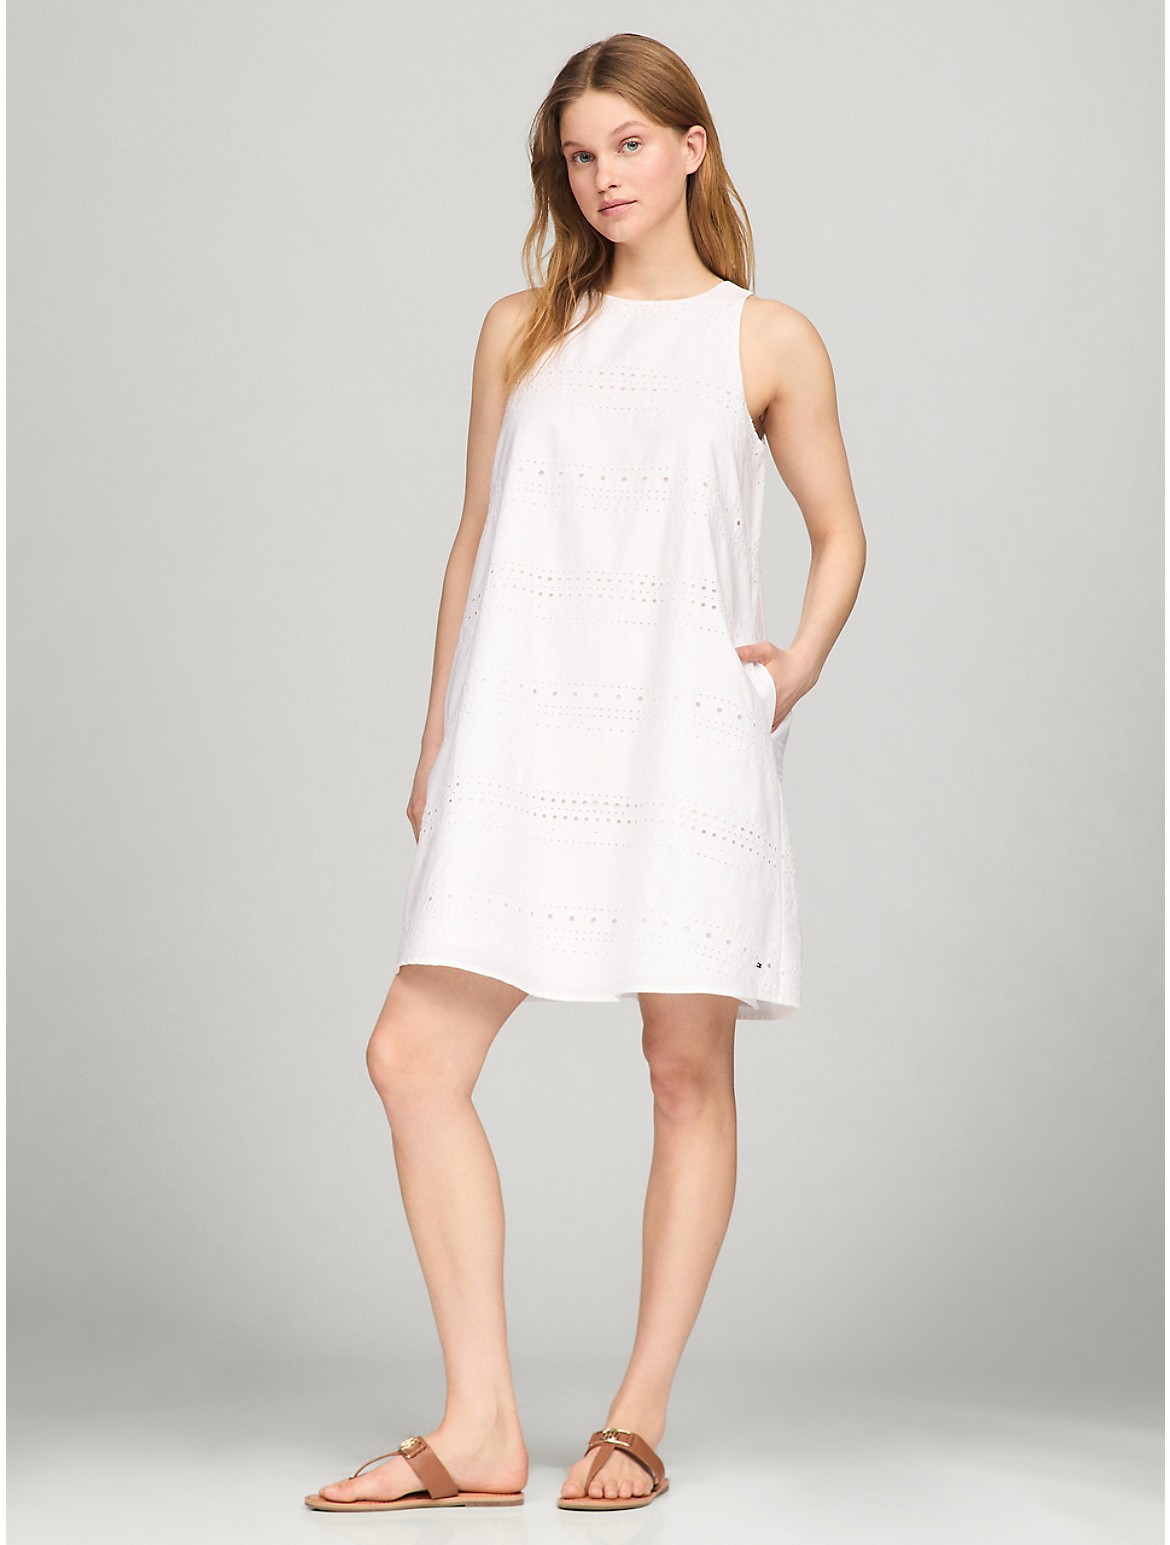 Tommy Hilfiger Women's Sleeveless Embroidered Eyelet Dress